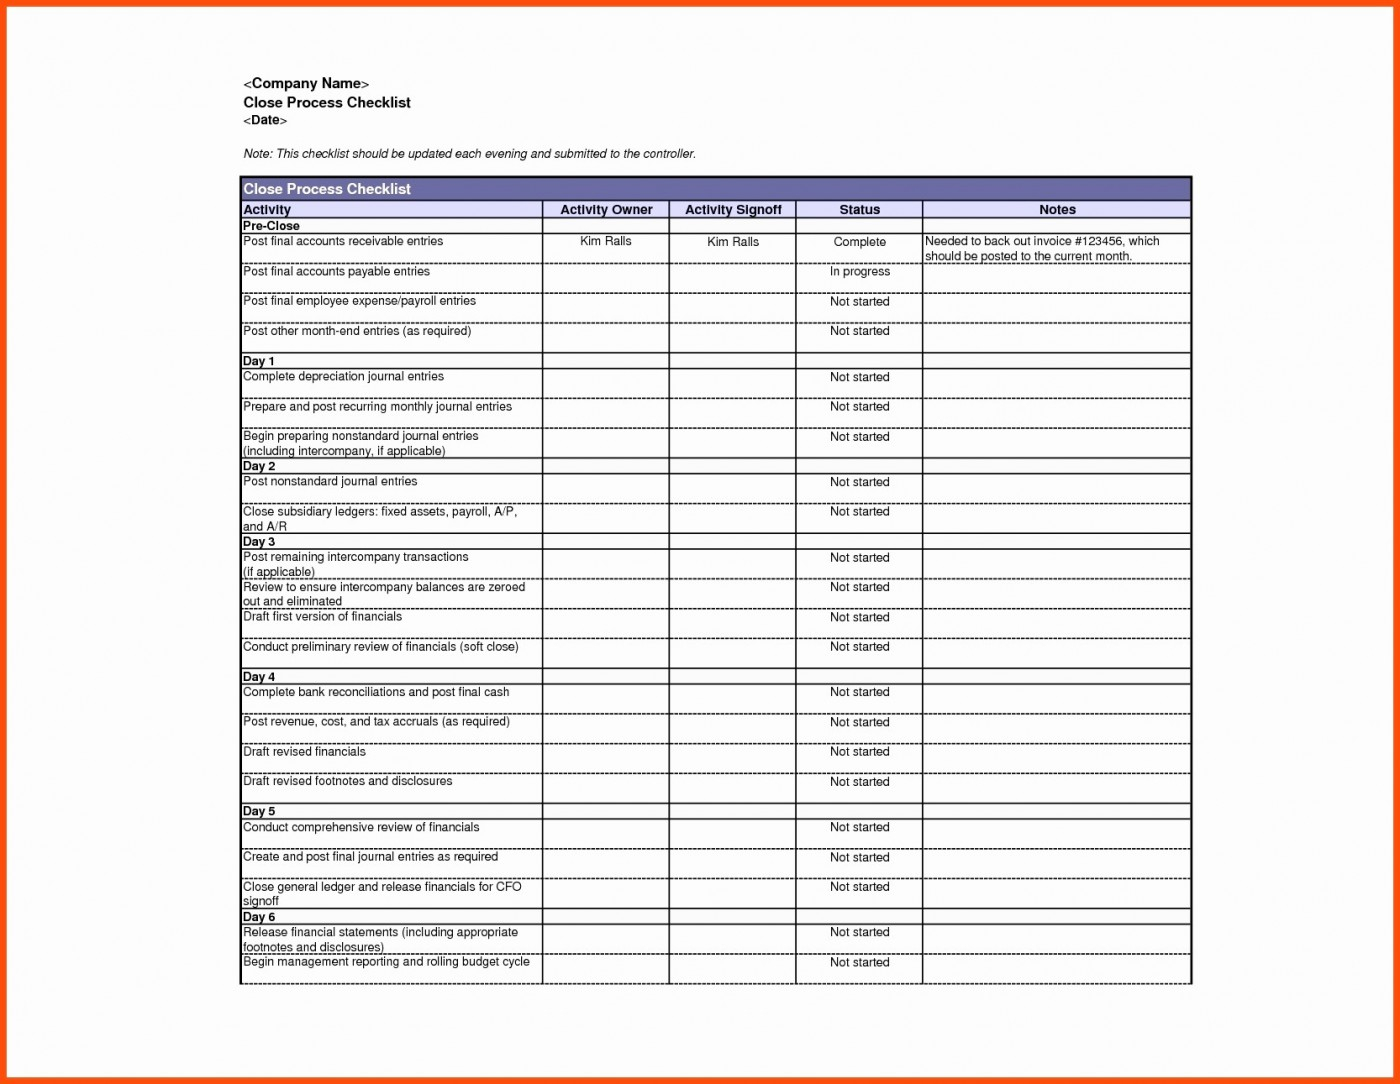 Estate Administration Spreadsheet For 001 Probate Accounting Template Excel Ideas Estate Executor